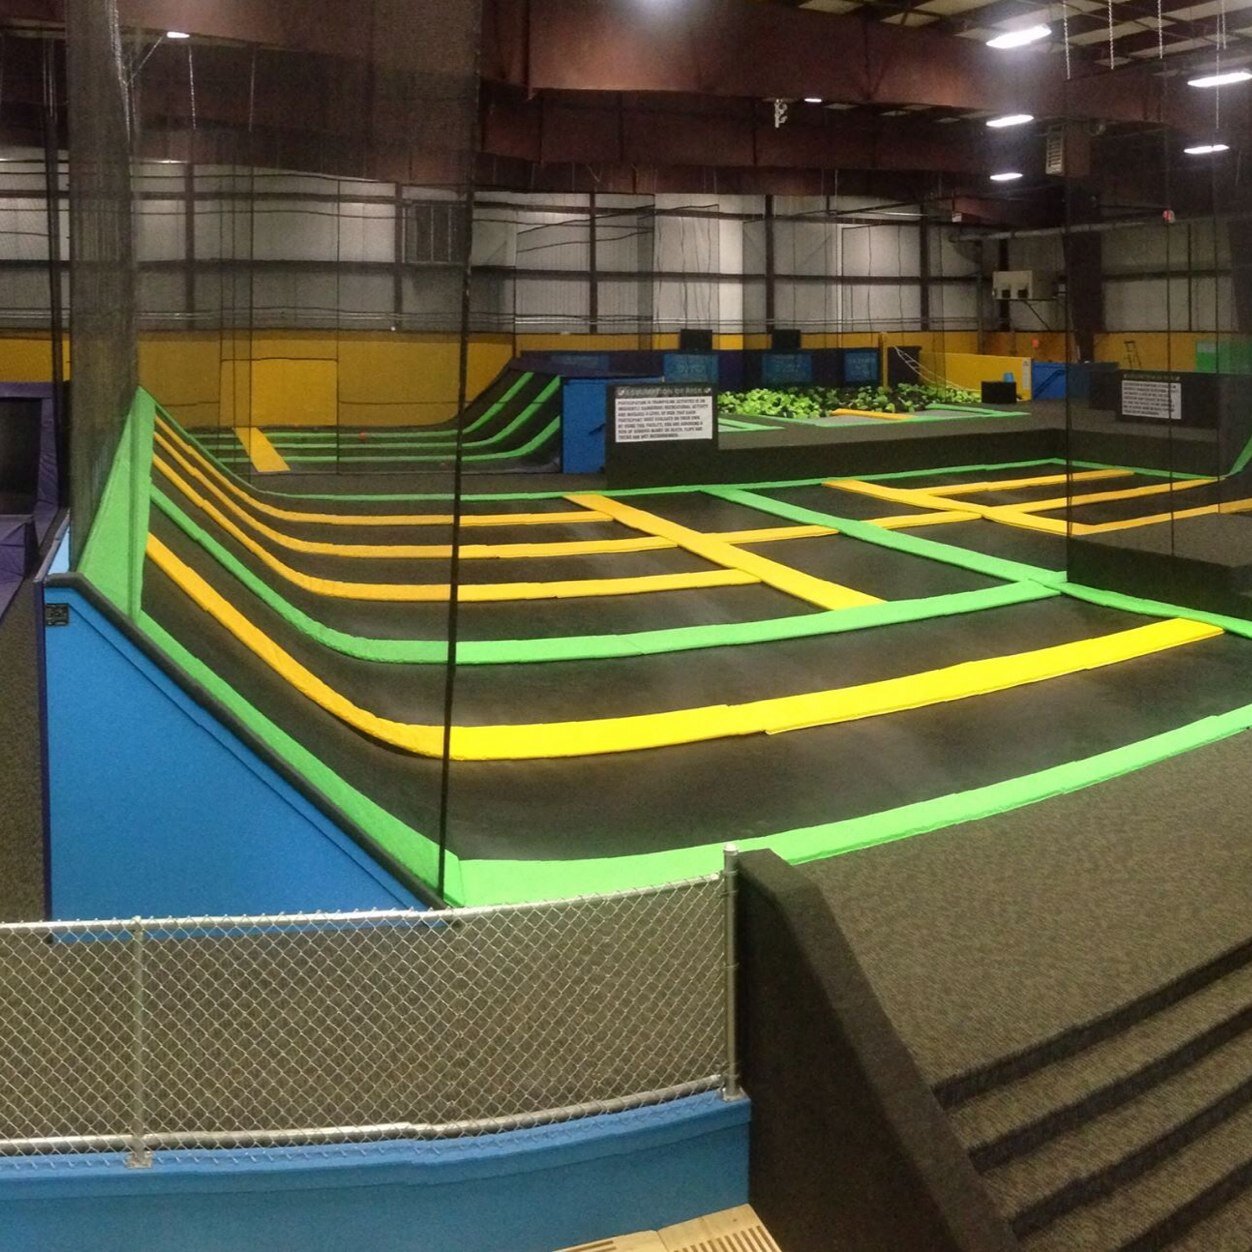 Get Air is pleased to introduce its newest trampoline park opening in Wichita, Kansas with over 10,000 sq. feet of trampolines for ALL AGES!